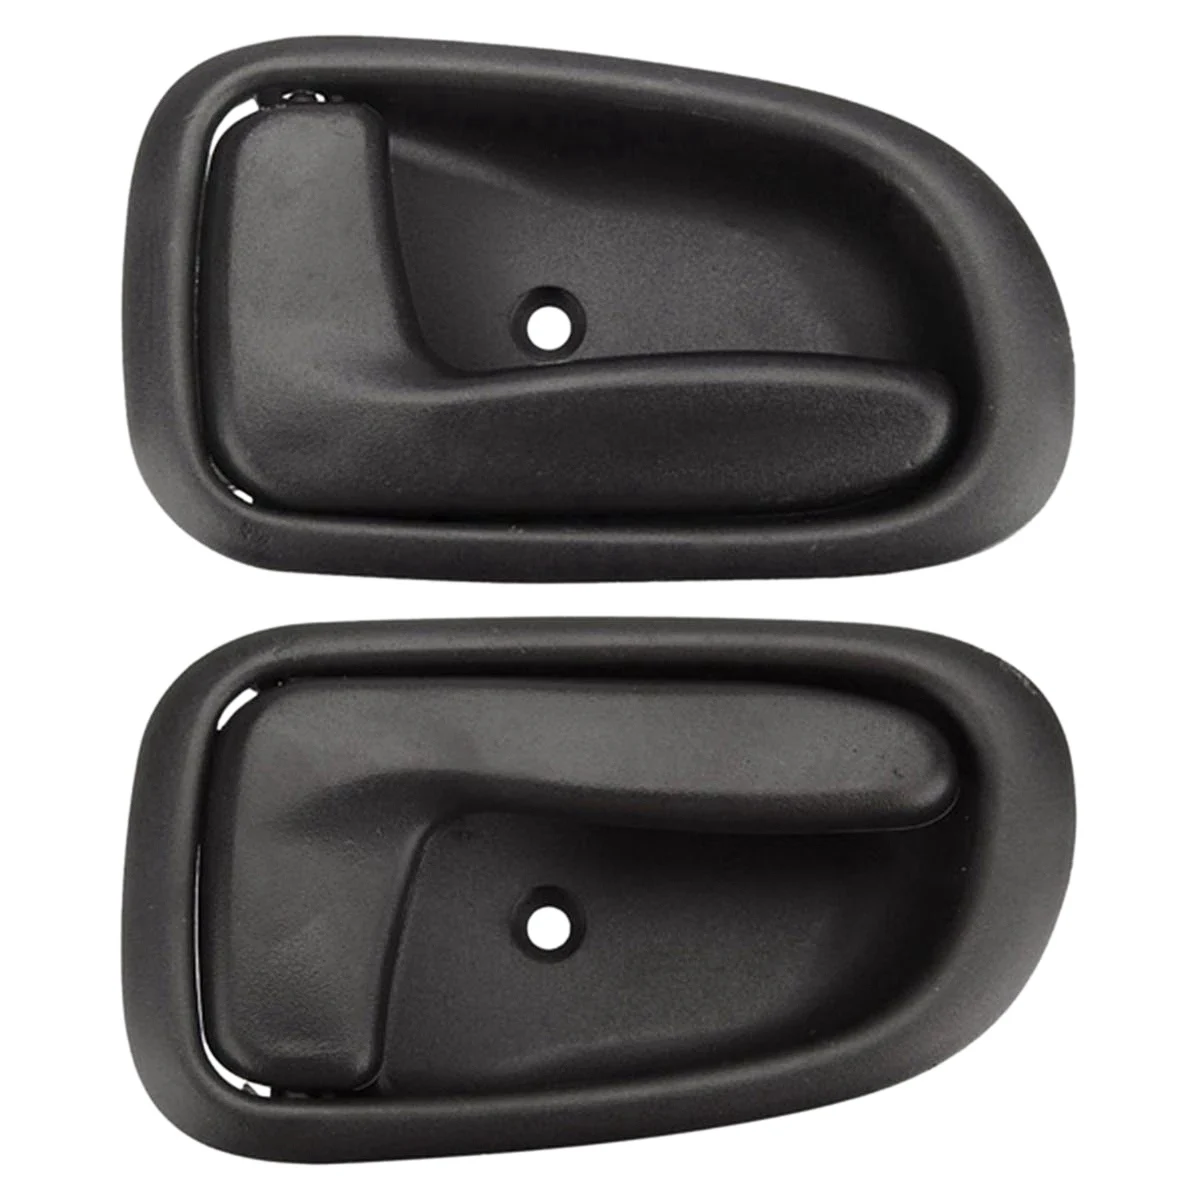 

Car Inside Interior Door Handle Black Left/Right Side Front Rear for Toyota Corolla GEO PRIZM 1993 1994 1995 1996 1997